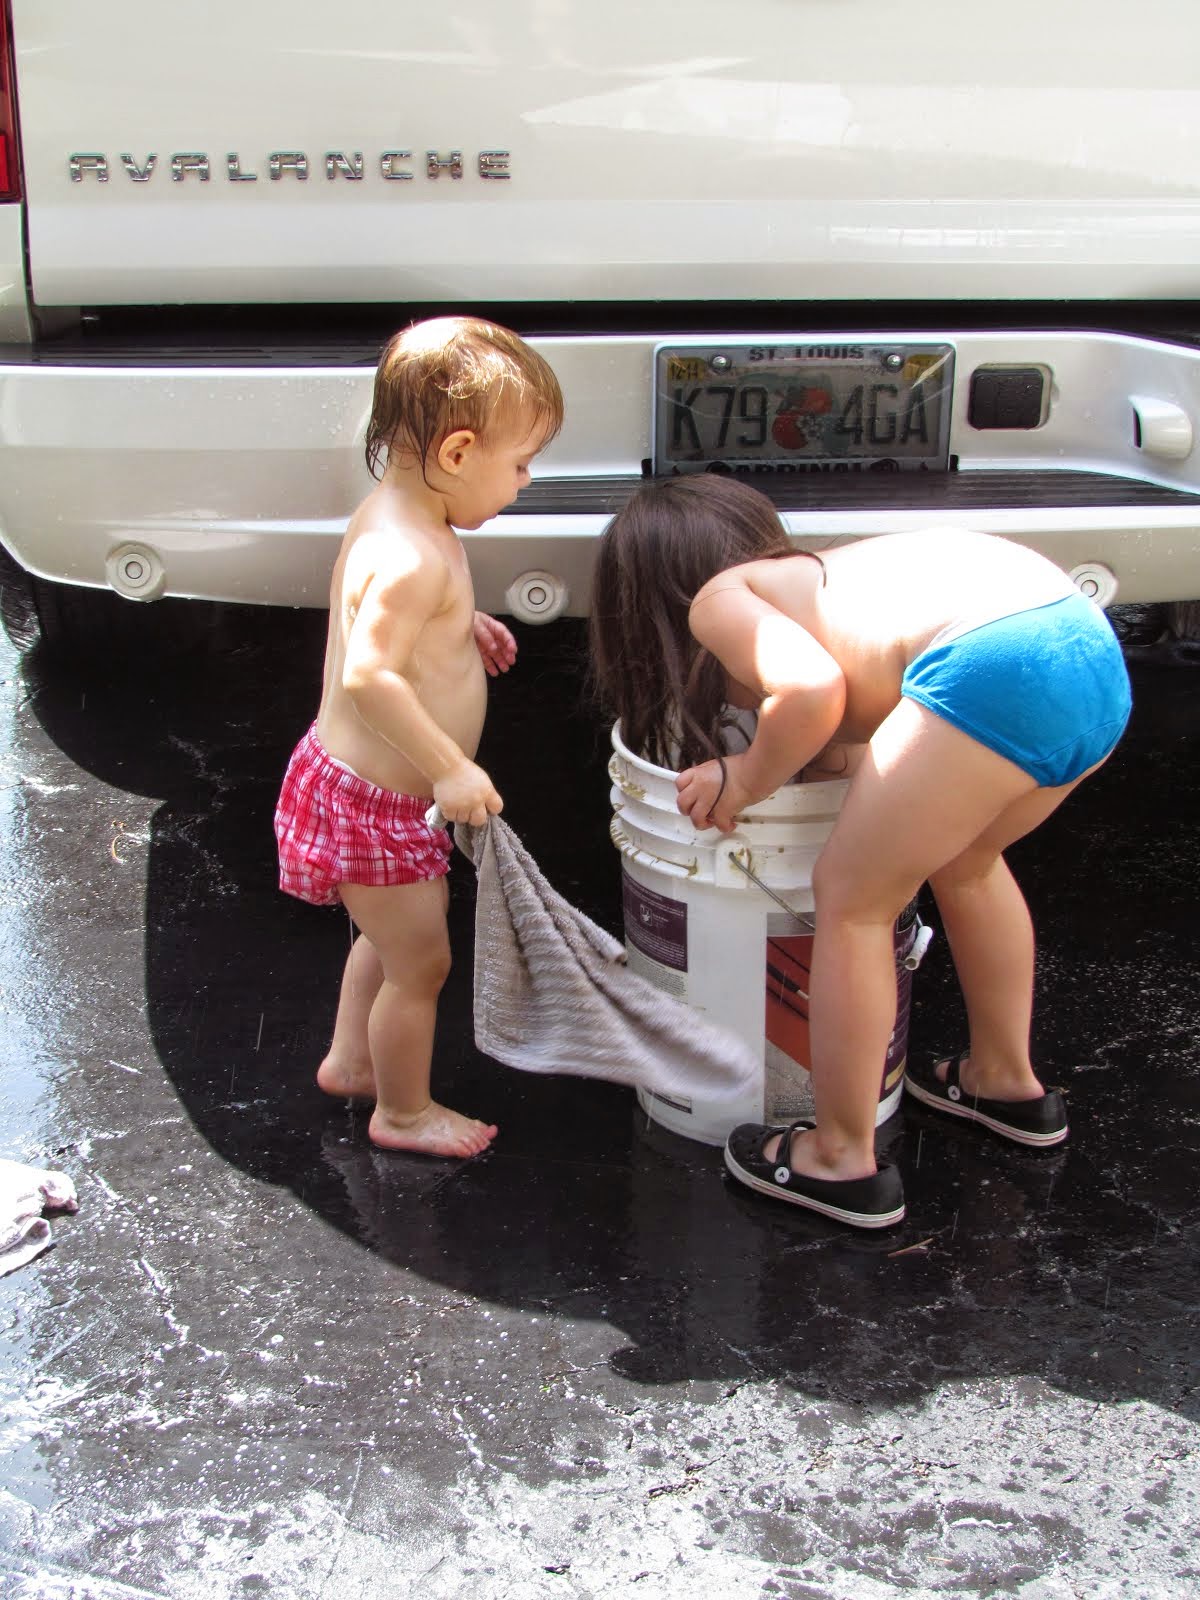 welcome to the carwash